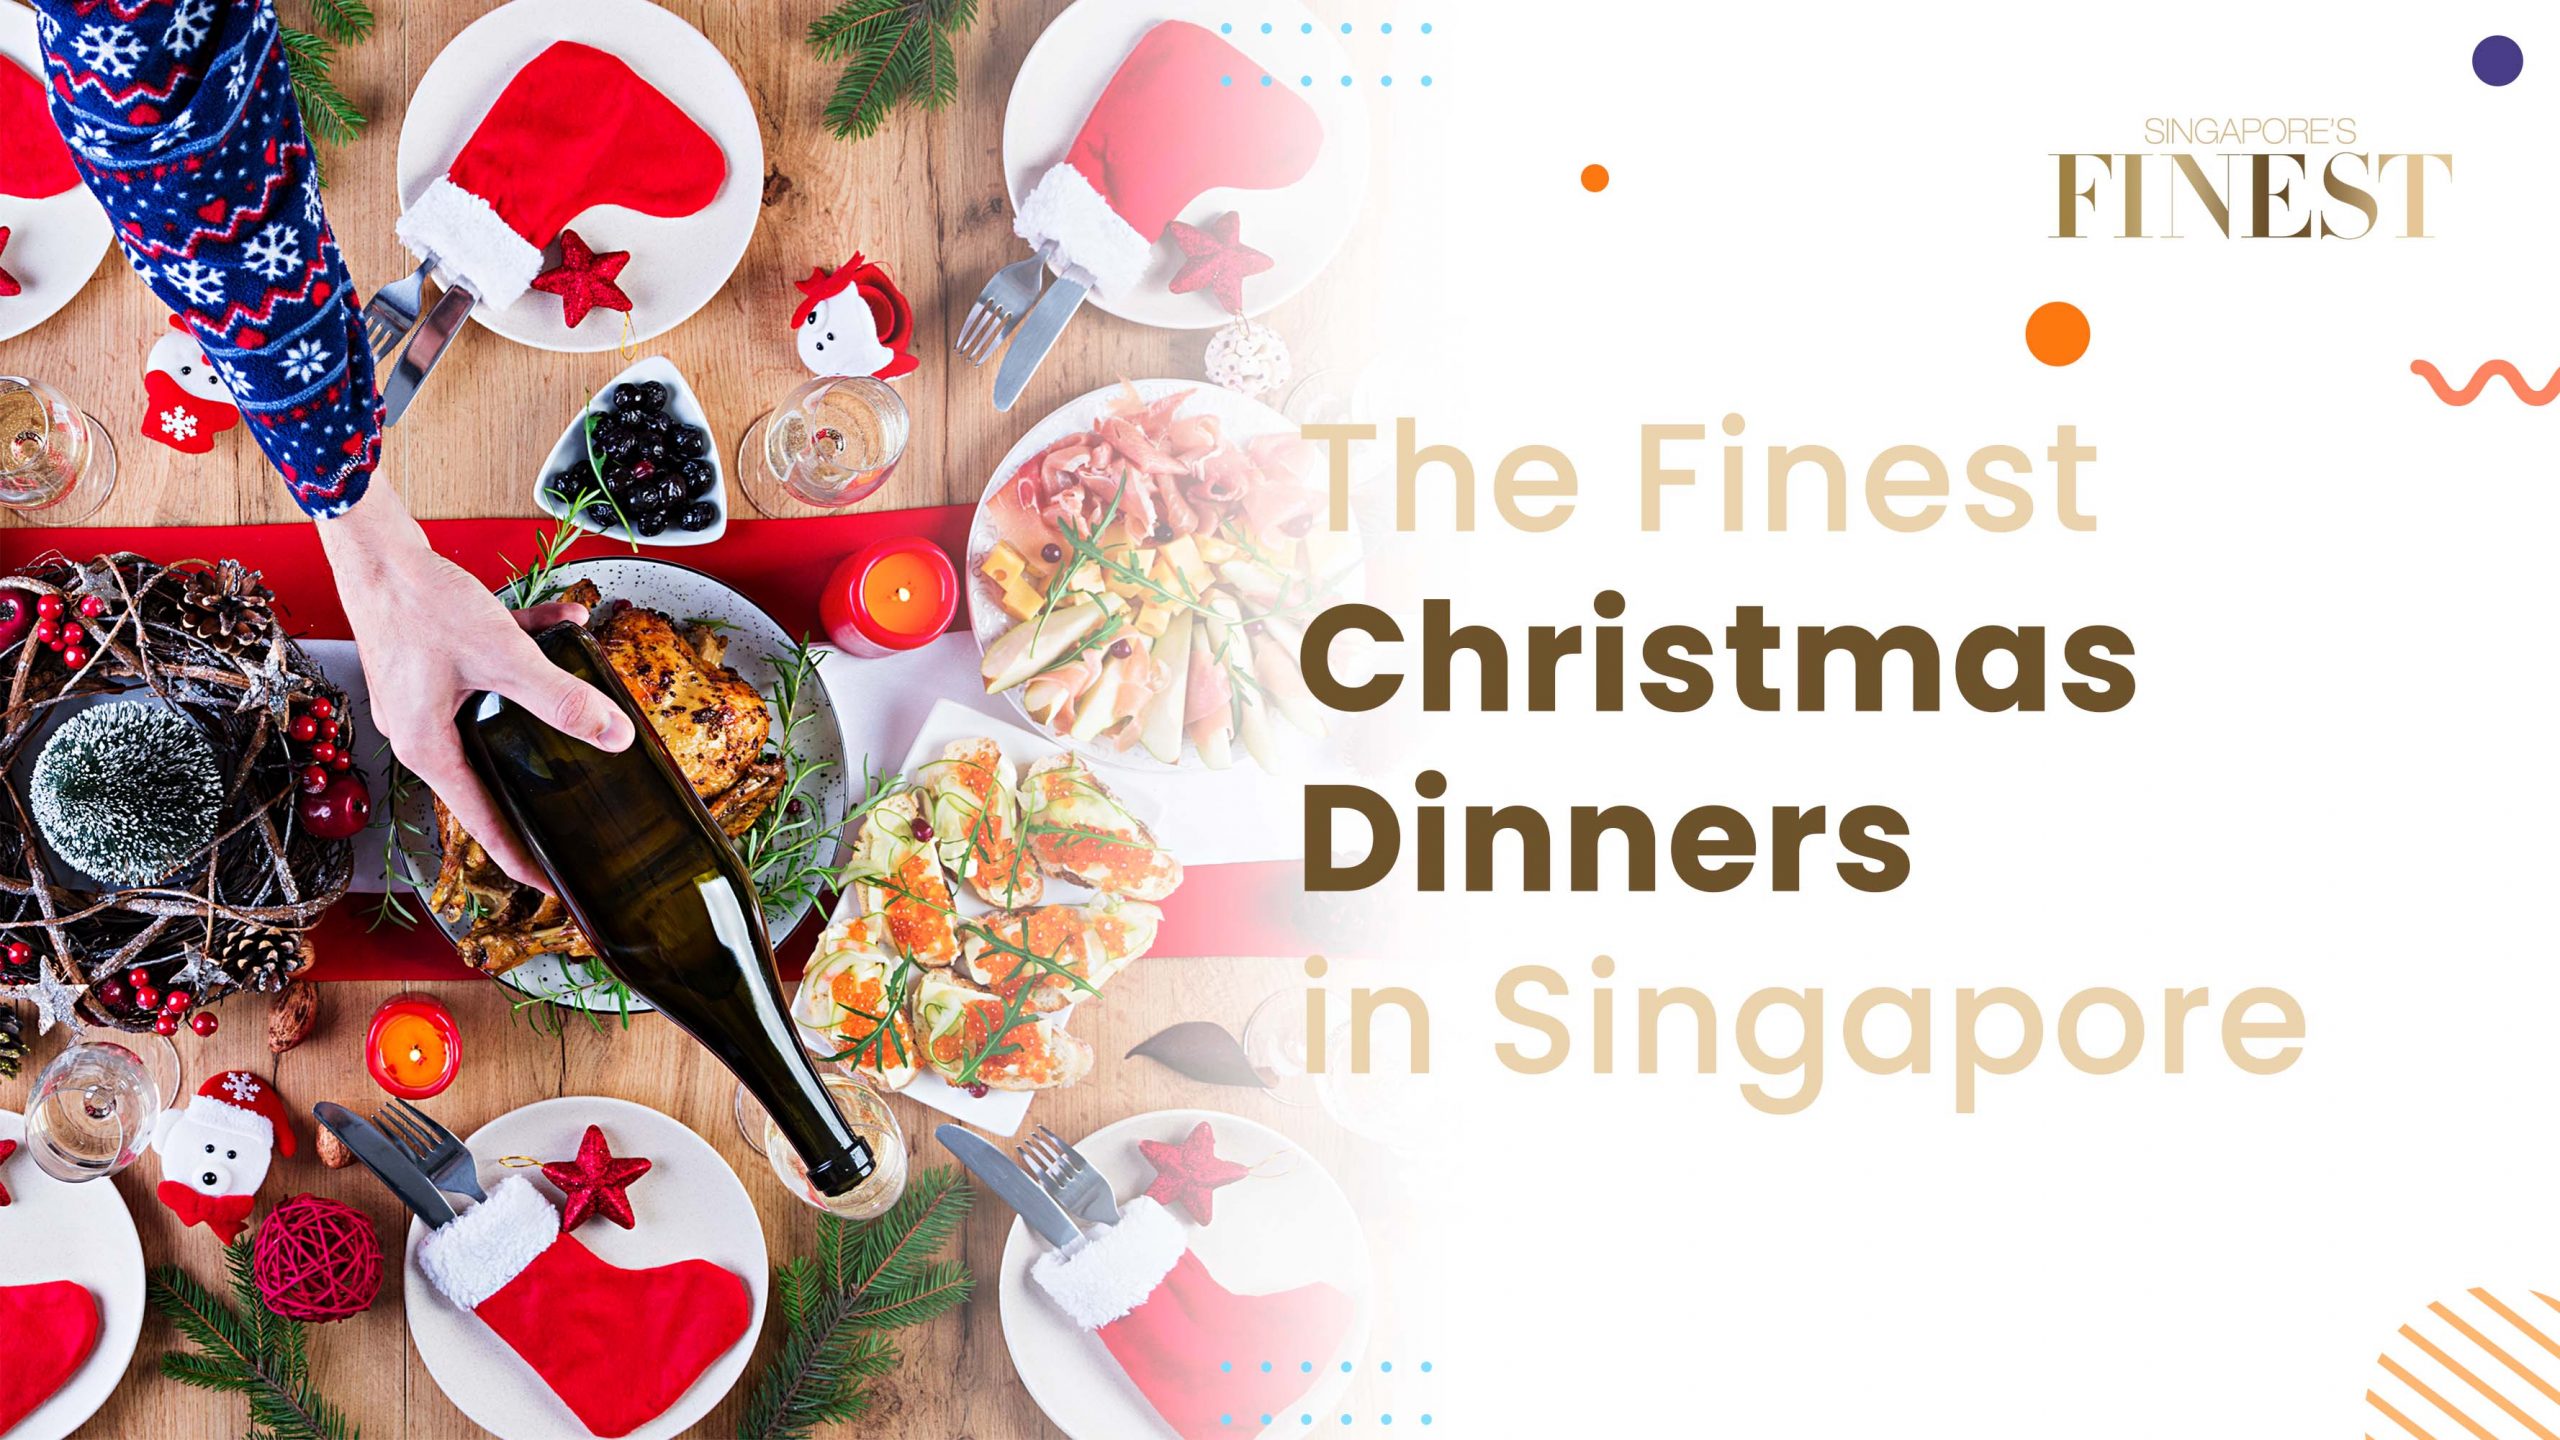 The Finest Christmas Dinners in Singapore